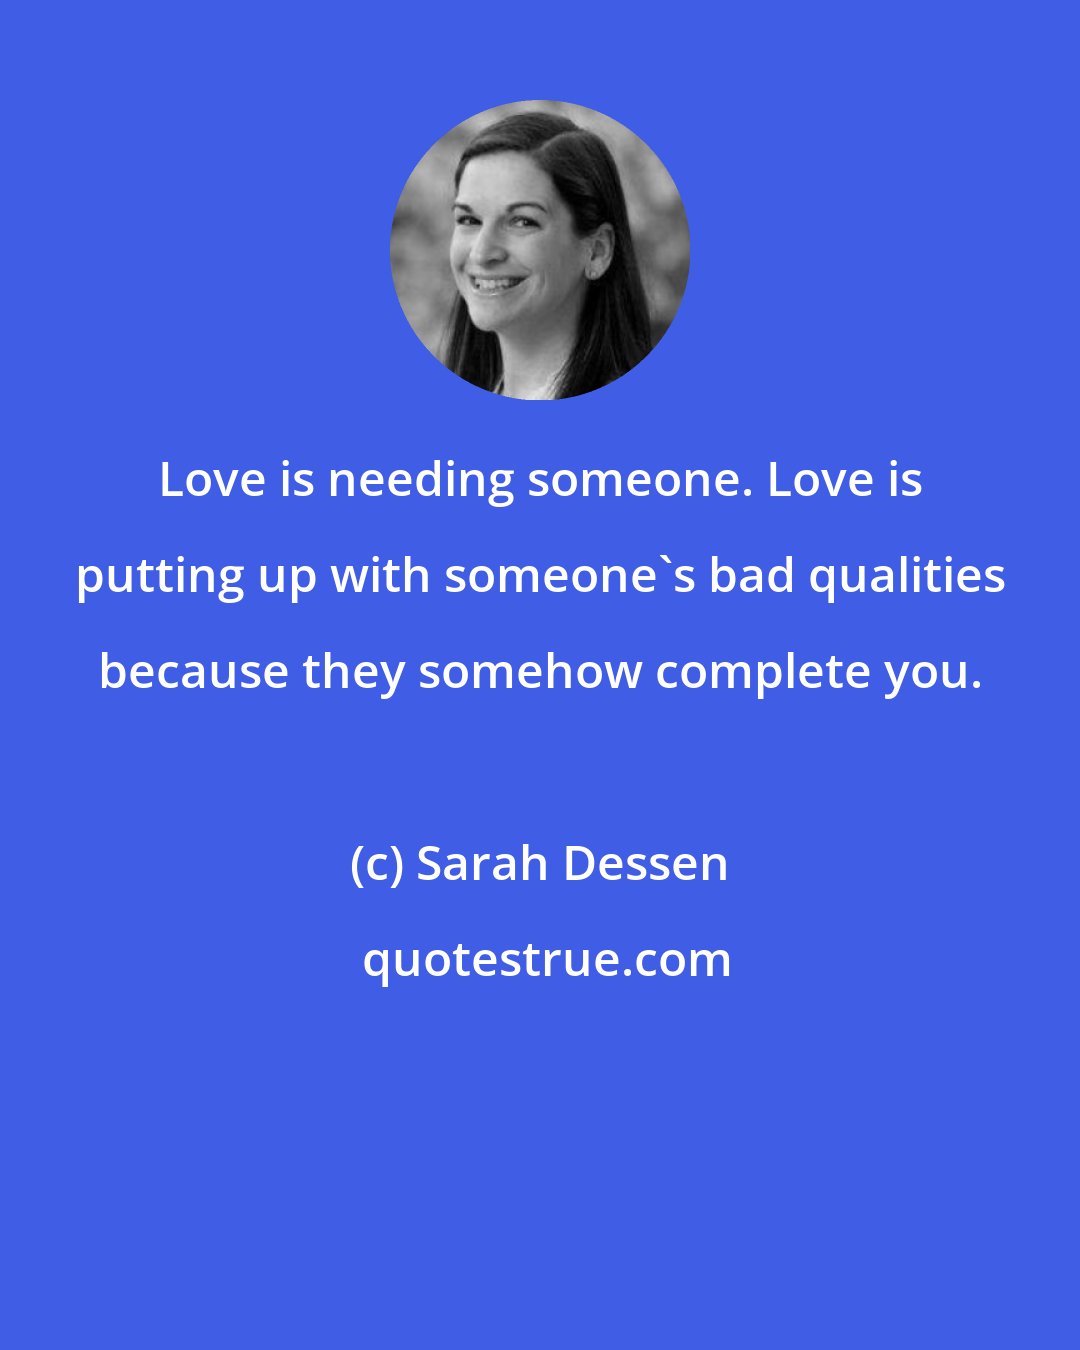 Sarah Dessen: Love is needing someone. Love is putting up with someone's bad qualities because they somehow complete you.